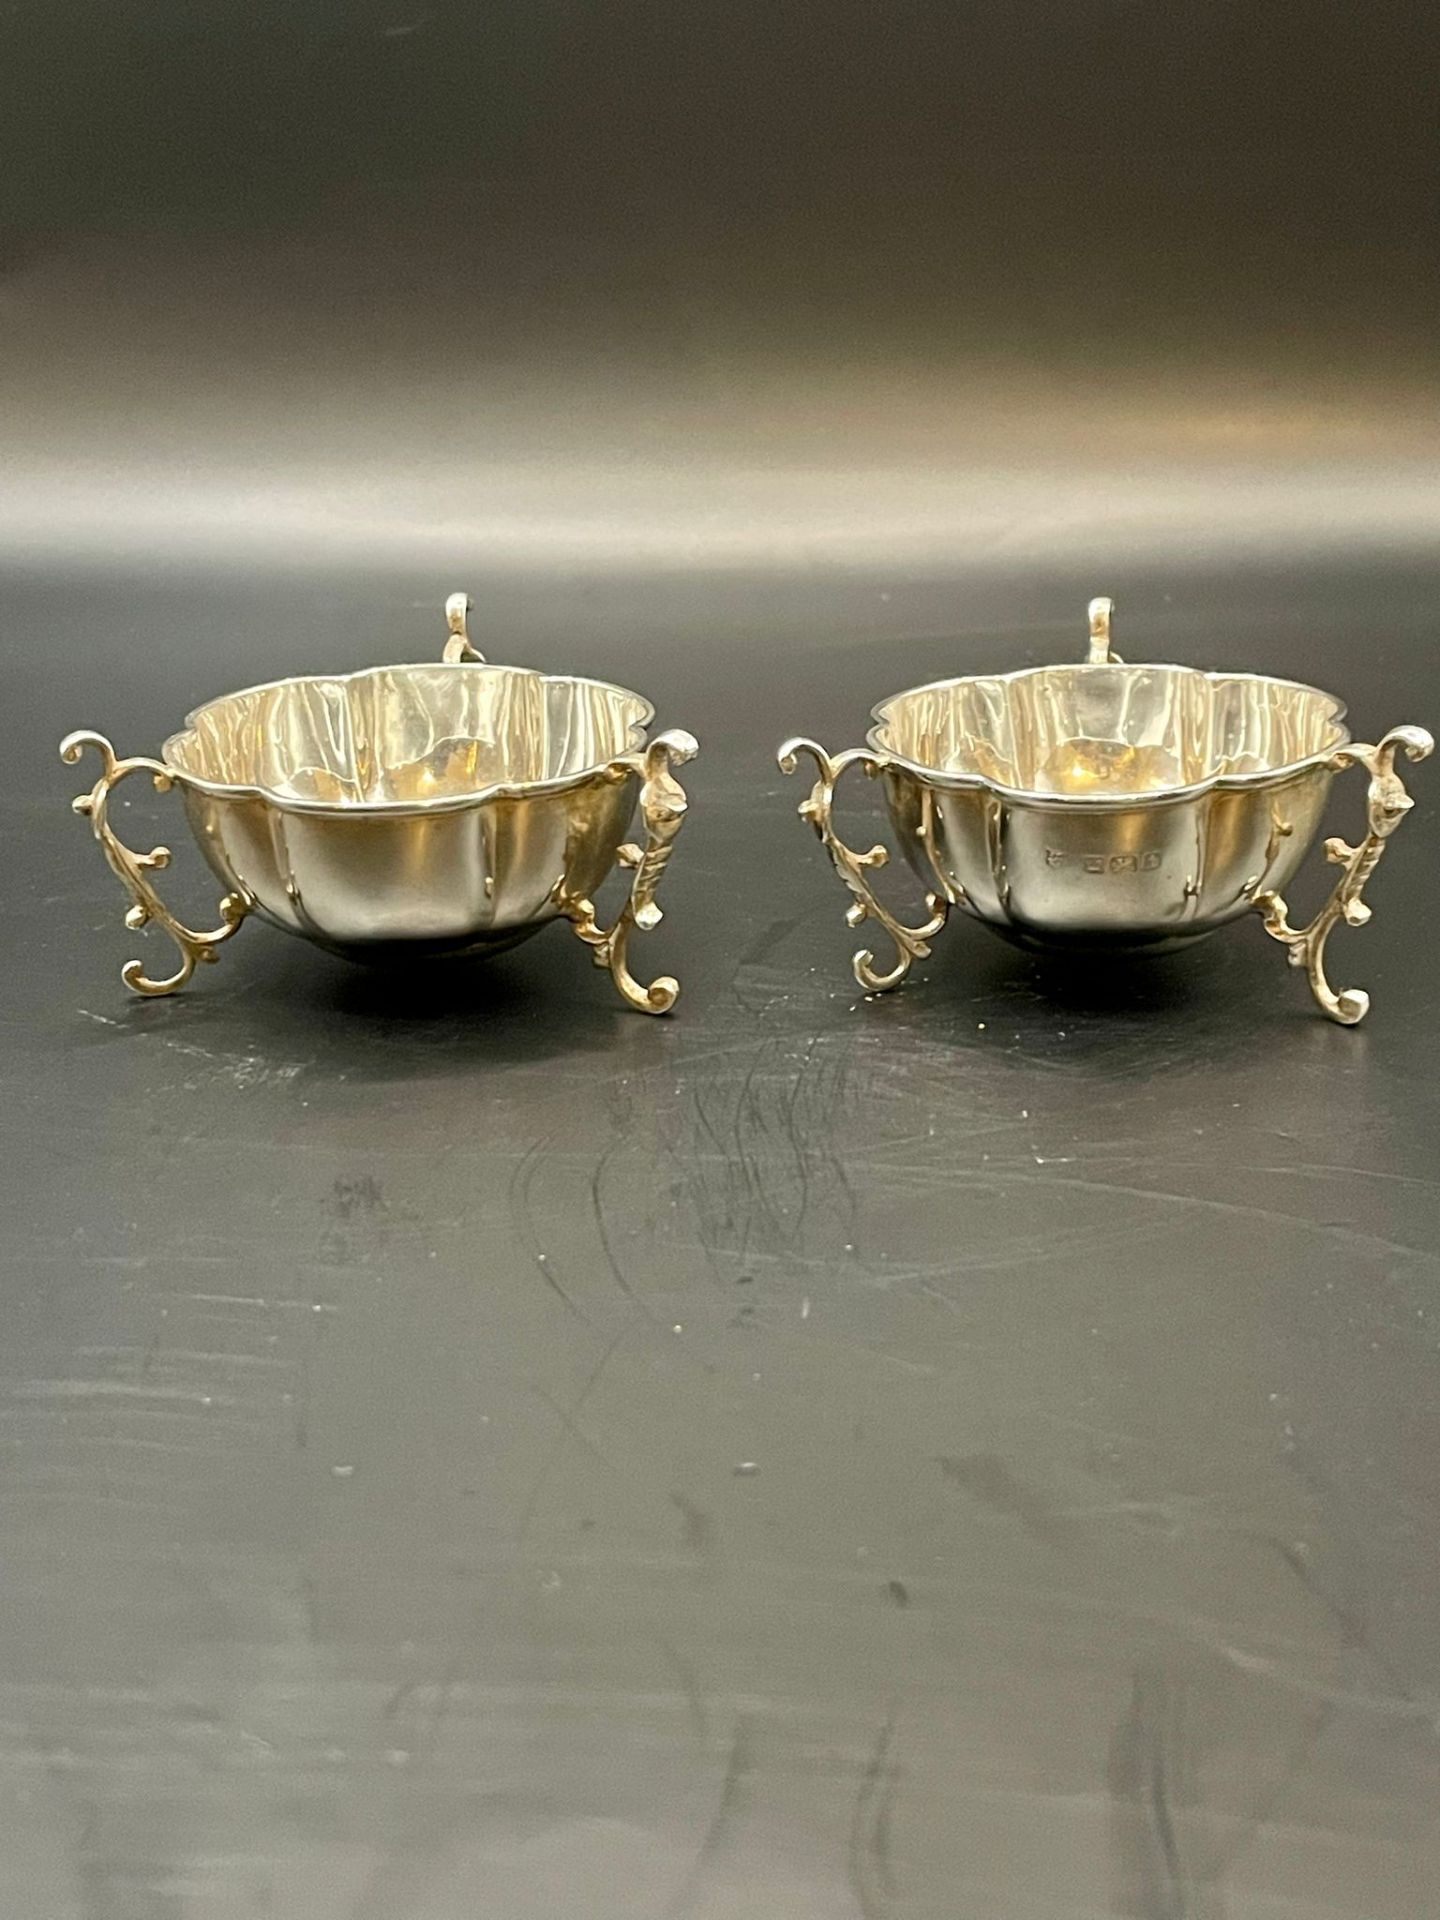 Antique Solid Silver Salt Dishes Fully Hallmarked .- JD over WD in lozenge for James Deakin & Sons J - Image 10 of 15